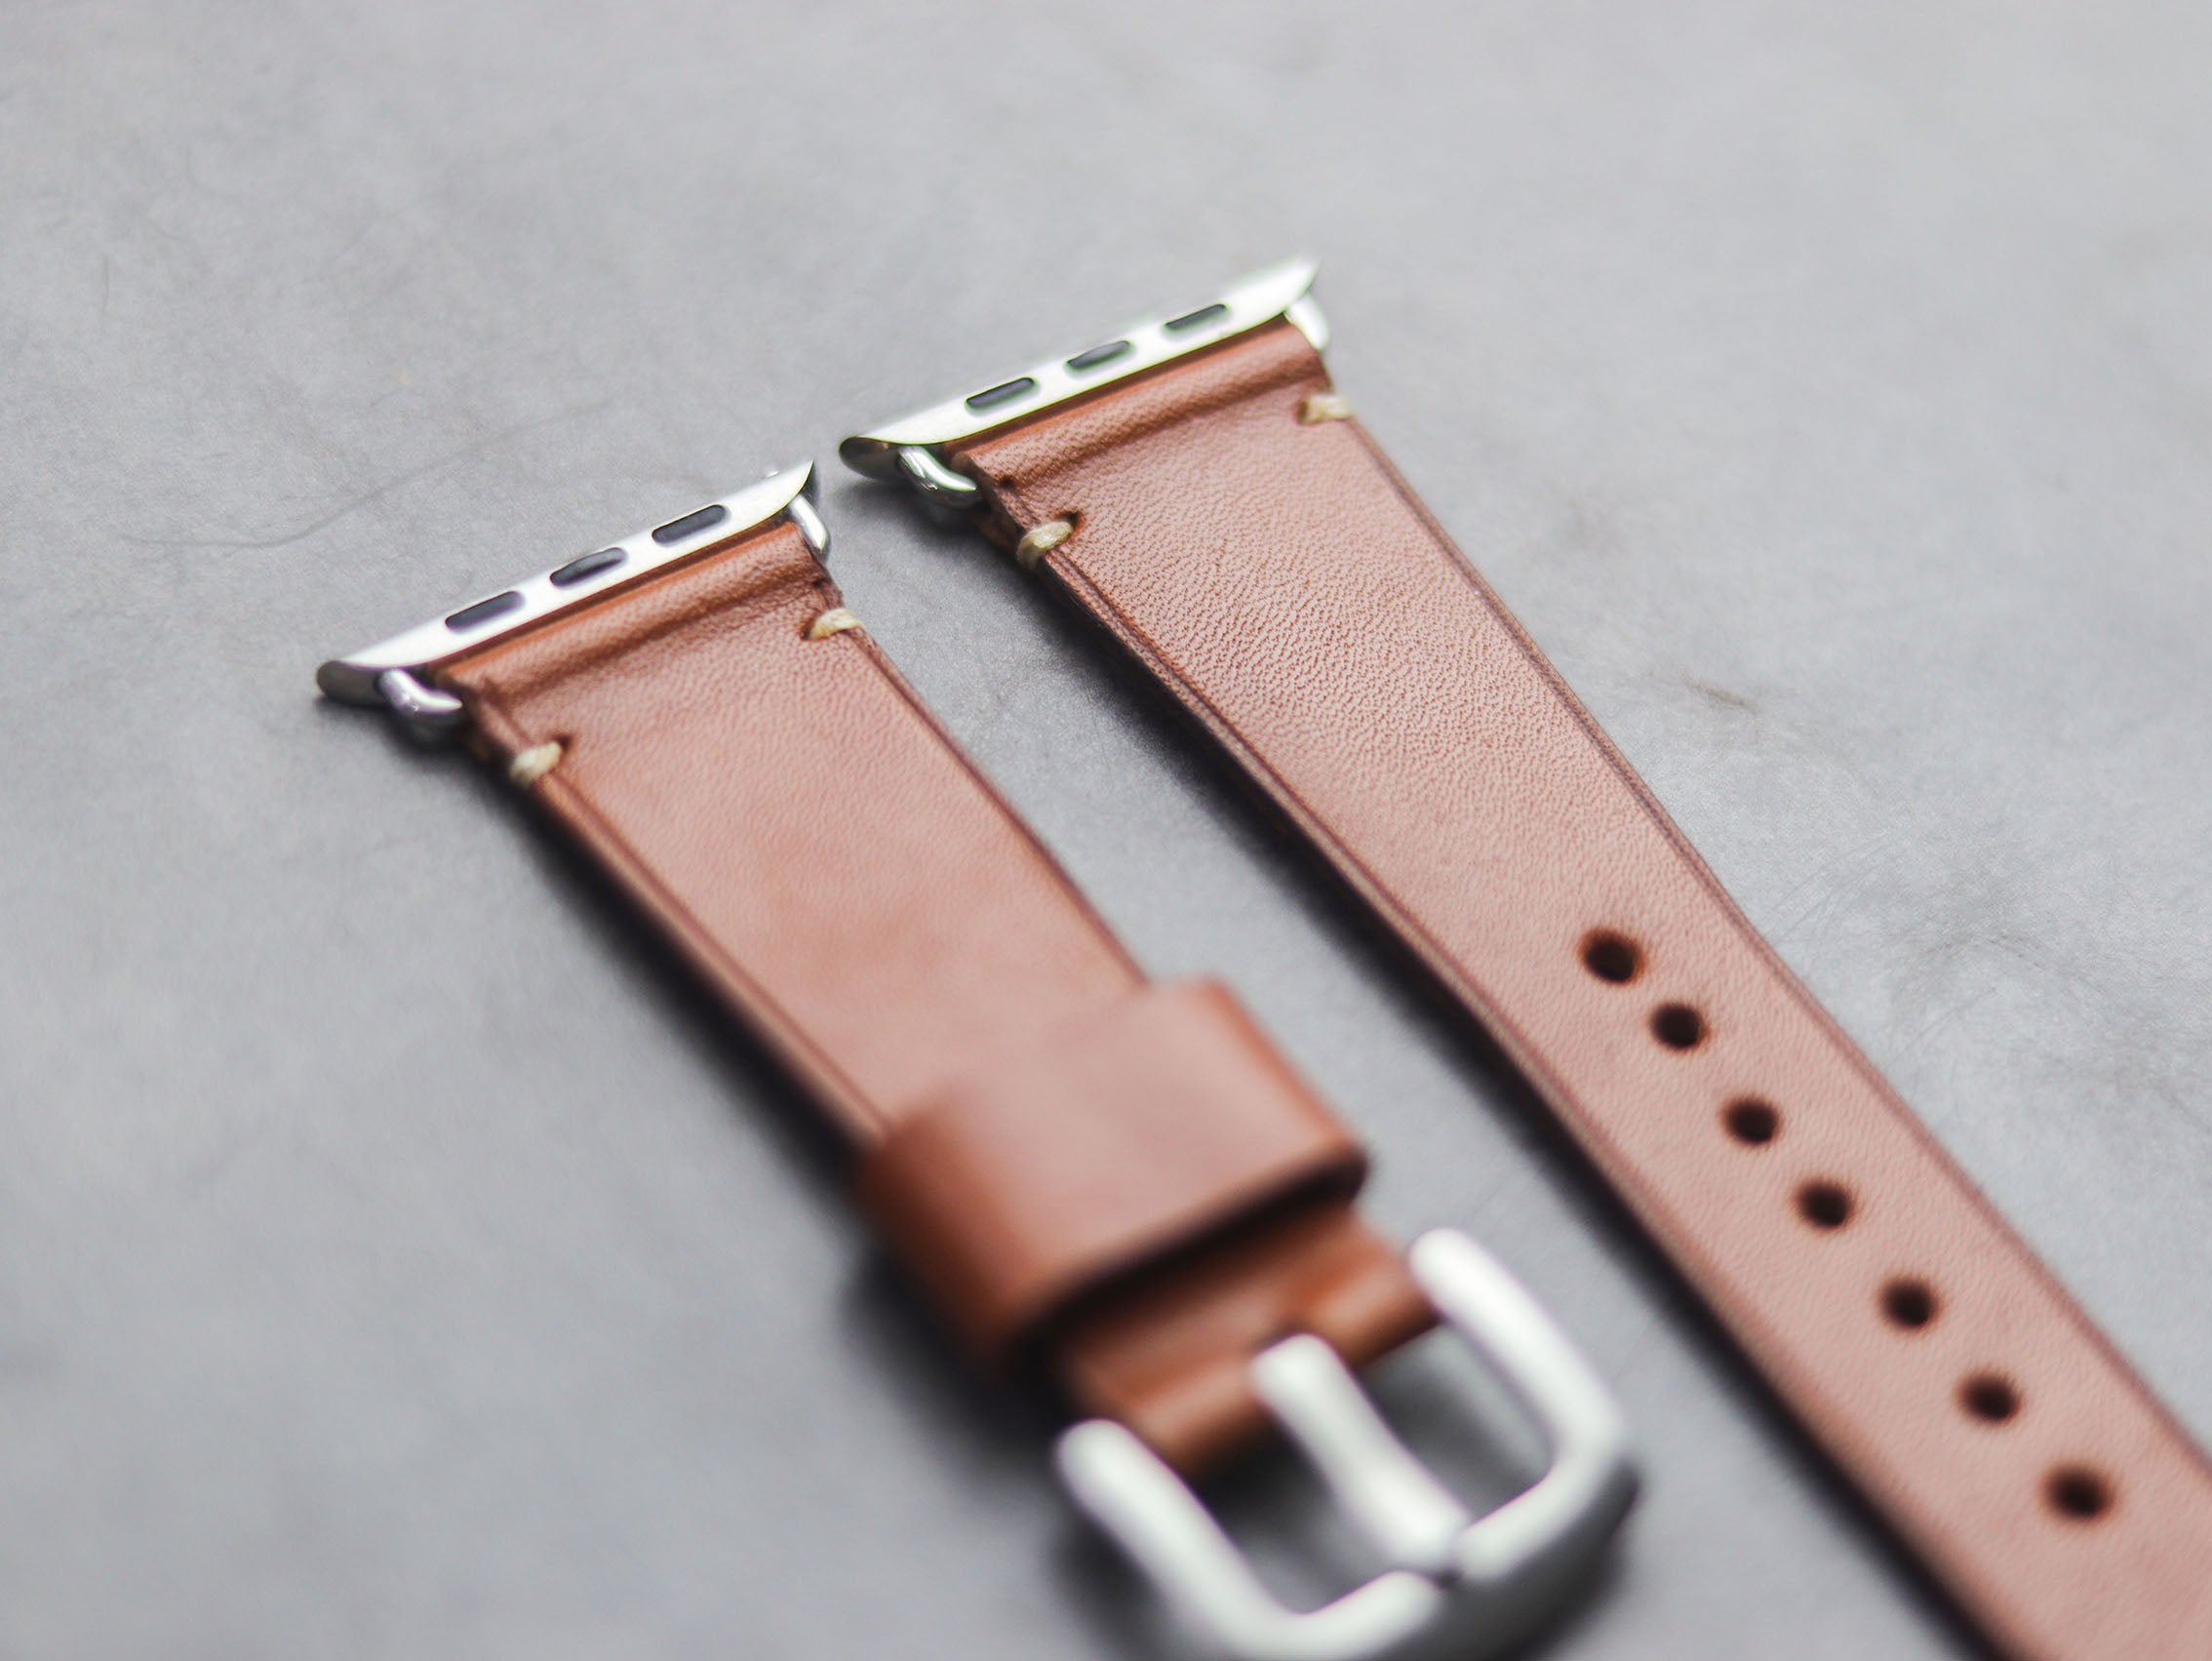 TAN BROWN MINIMAL STITCHED HAND-CRAFTED APPLE WATCH STRAPS